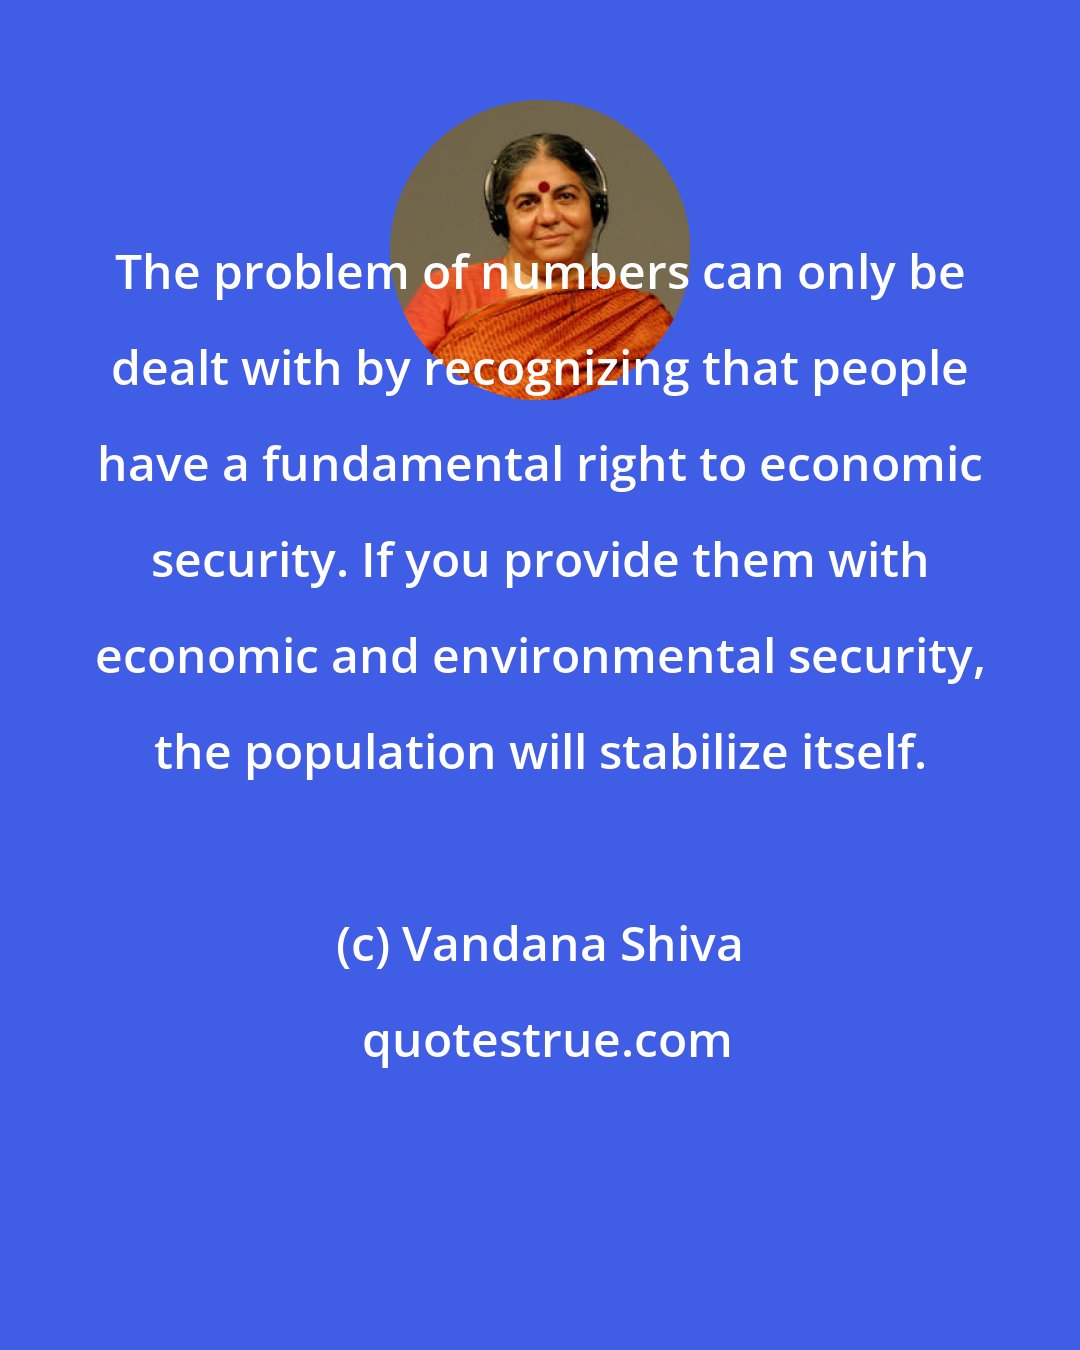 Vandana Shiva: The problem of numbers can only be dealt with by recognizing that people have a fundamental right to economic security. If you provide them with economic and environmental security, the population will stabilize itself.